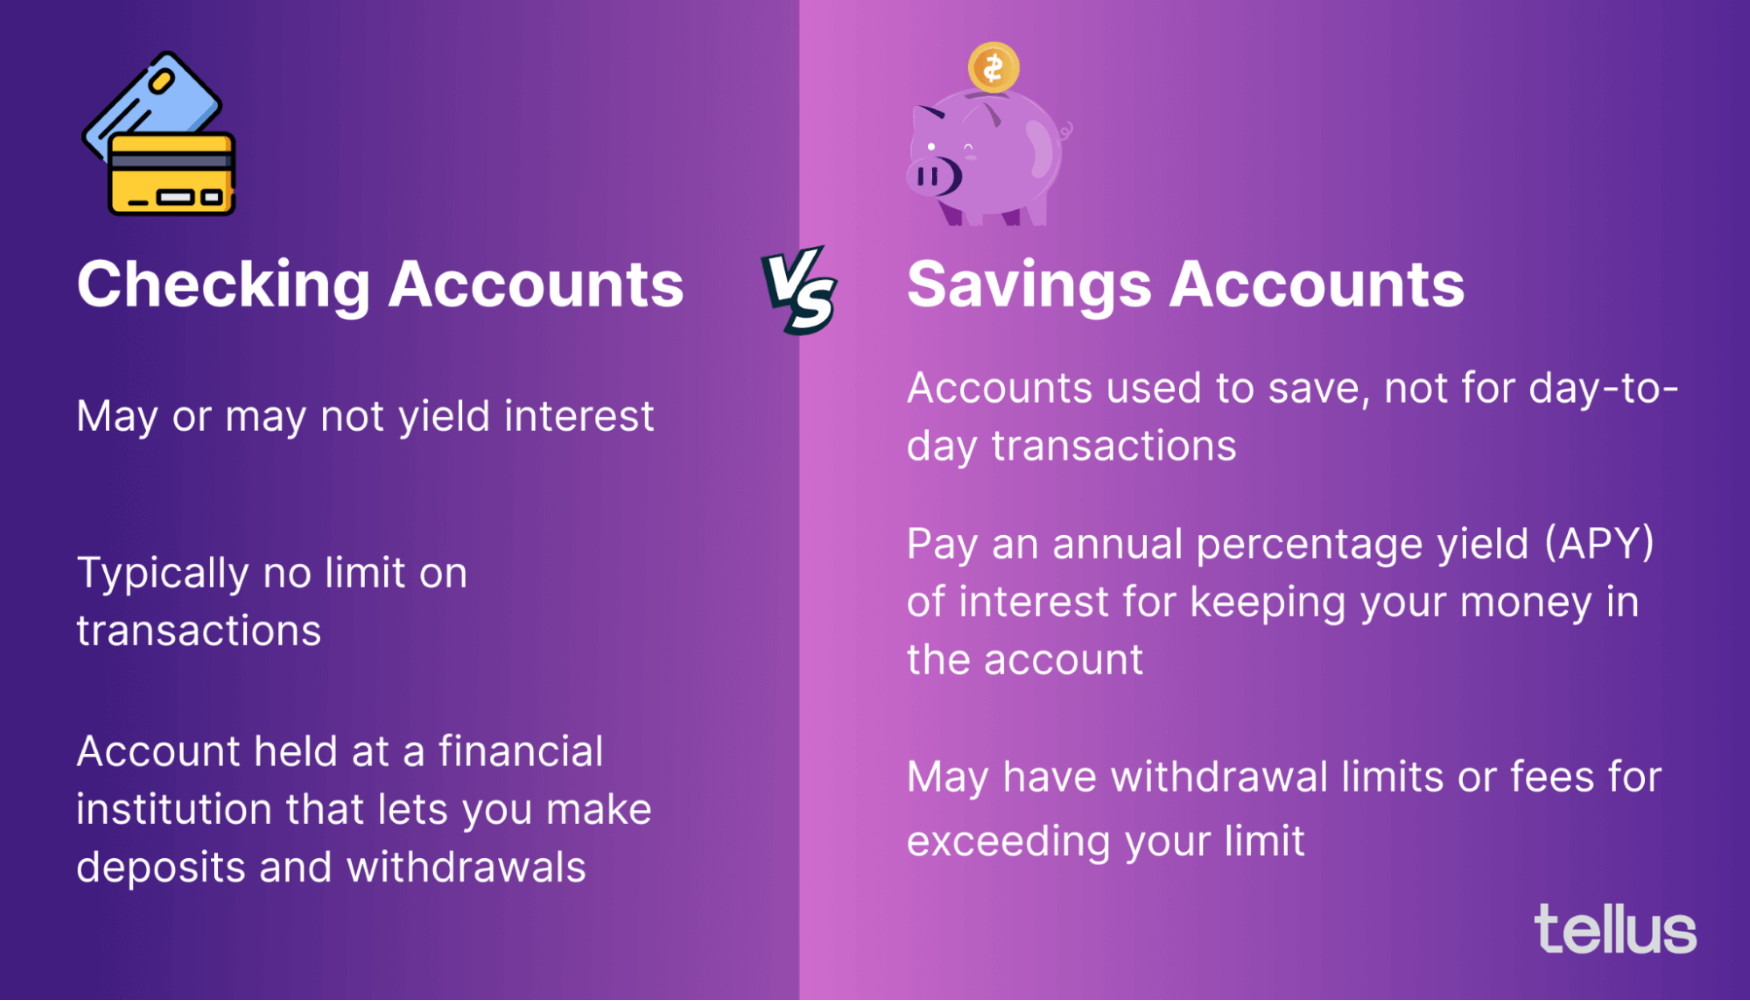 Infographic showing the differences between checking and savings accounts